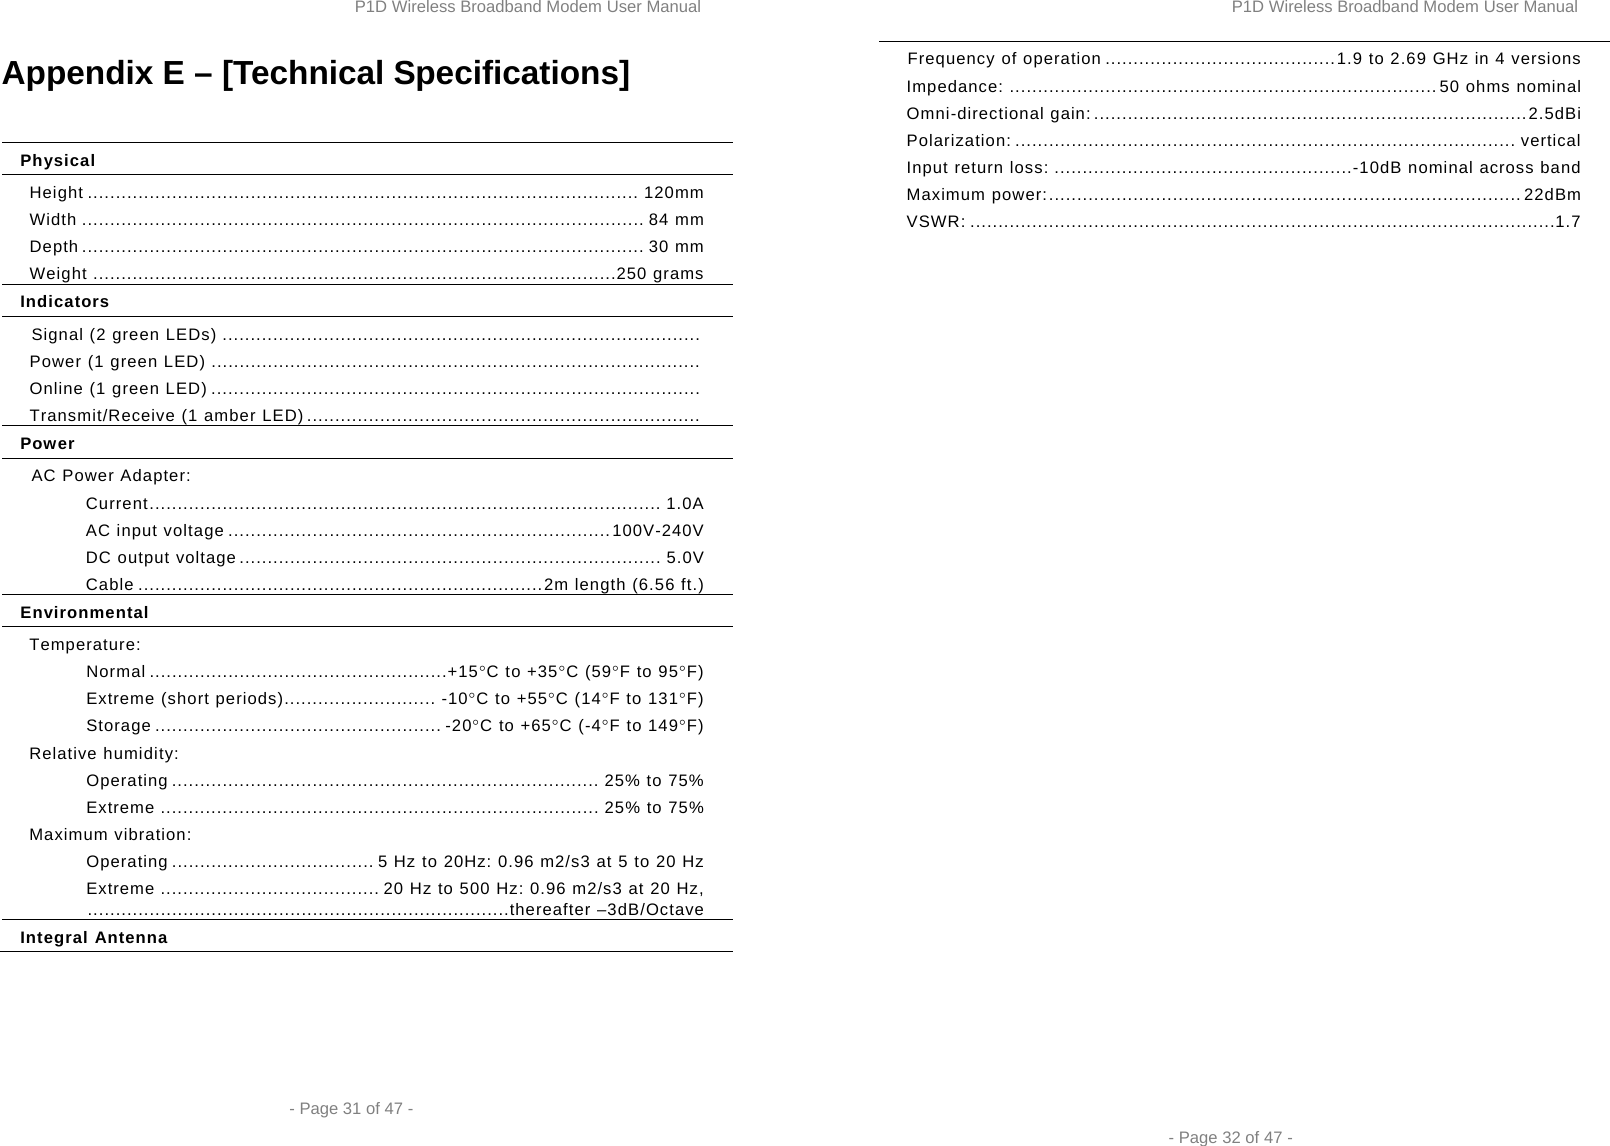 P1D Wireless Broadband Modem User Manual  - Page 31 of 47 -  Appendix E – [Technical Specifications]  Physical Height .................................................................................................. 120mm Width .................................................................................................... 84 mm  Depth .................................................................................................... 30  mm Weight ............................................................................................. 250 grams Indicators Signal (2 green LEDs) .....................................................................................  Power (1 green LED) .......................................................................................  Online (1 green LED) .......................................................................................  Transmit/Receive (1 amber LED) ......................................................................  Power AC Power Adapter: Current ...........................................................................................  1.0A AC input voltage .................................................................... 100V-240V DC output voltage ........................................................................... 5.0V Cable ........................................................................ 2m length (6.56 ft.) Environmental Temperature: Normal ..................................................... +15°C to +35°C (59°F to 95°F) Extreme (short periods)........................... -10°C to +55°C (14°F to 131°F) Storage ................................................... -20°C to +65°C (-4°F to 149°F) Relative humidity: Operating ............................................................................ 25% to 75% Extreme .............................................................................. 25% to 75% Maximum vibration: Operating .................................... 5 Hz to 20Hz: 0.96 m2/s3 at 5 to 20 Hz Extreme ....................................... 20 Hz to 500 Hz: 0.96 m2/s3 at 20 Hz,   ...........................................................................thereafter  –3dB/Octave Integral Antenna P1D Wireless Broadband Modem User Manual  - Page 32 of 47 - Frequency of operation ......................................... 1.9 to 2.69 GHz in 4 versions Impedance: ............................................................................ 50 ohms nominal Omni-directional gain: ............................................................................. 2.5dBi Polarization: ......................................................................................... vertical Input return loss: ..................................................... -10dB nominal across band Maximum power: .................................................................................... 22dBm VSWR: ........................................................................................................ 1.7 